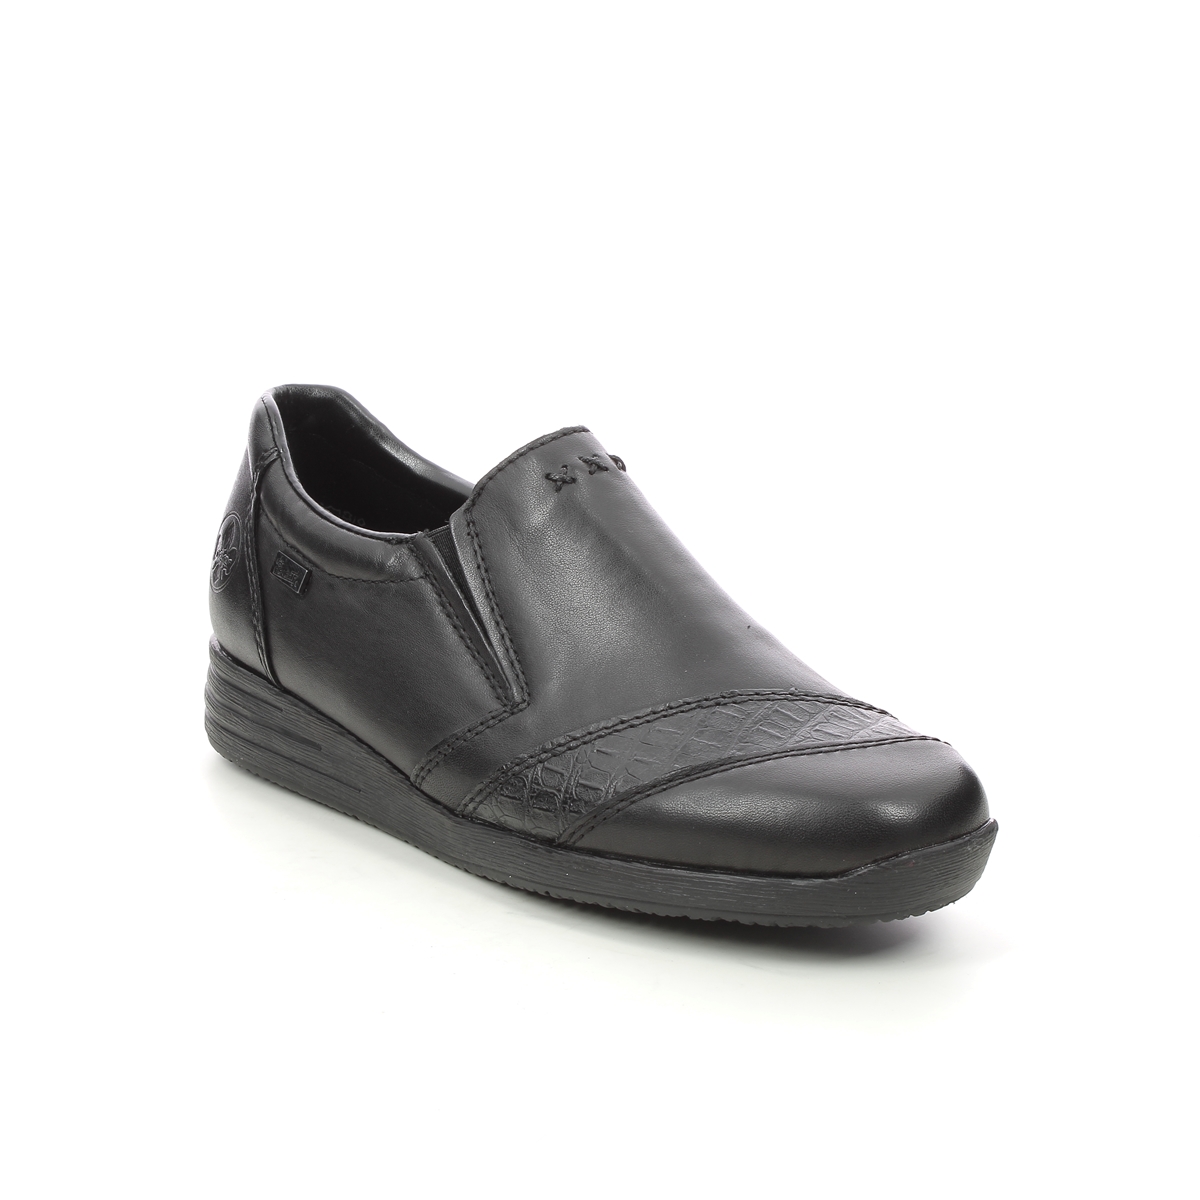 Rieker Bodica Tex Black Leather Womens Comfort Slip On Shoes 58462-00 In Size 39 In Plain Black Leather